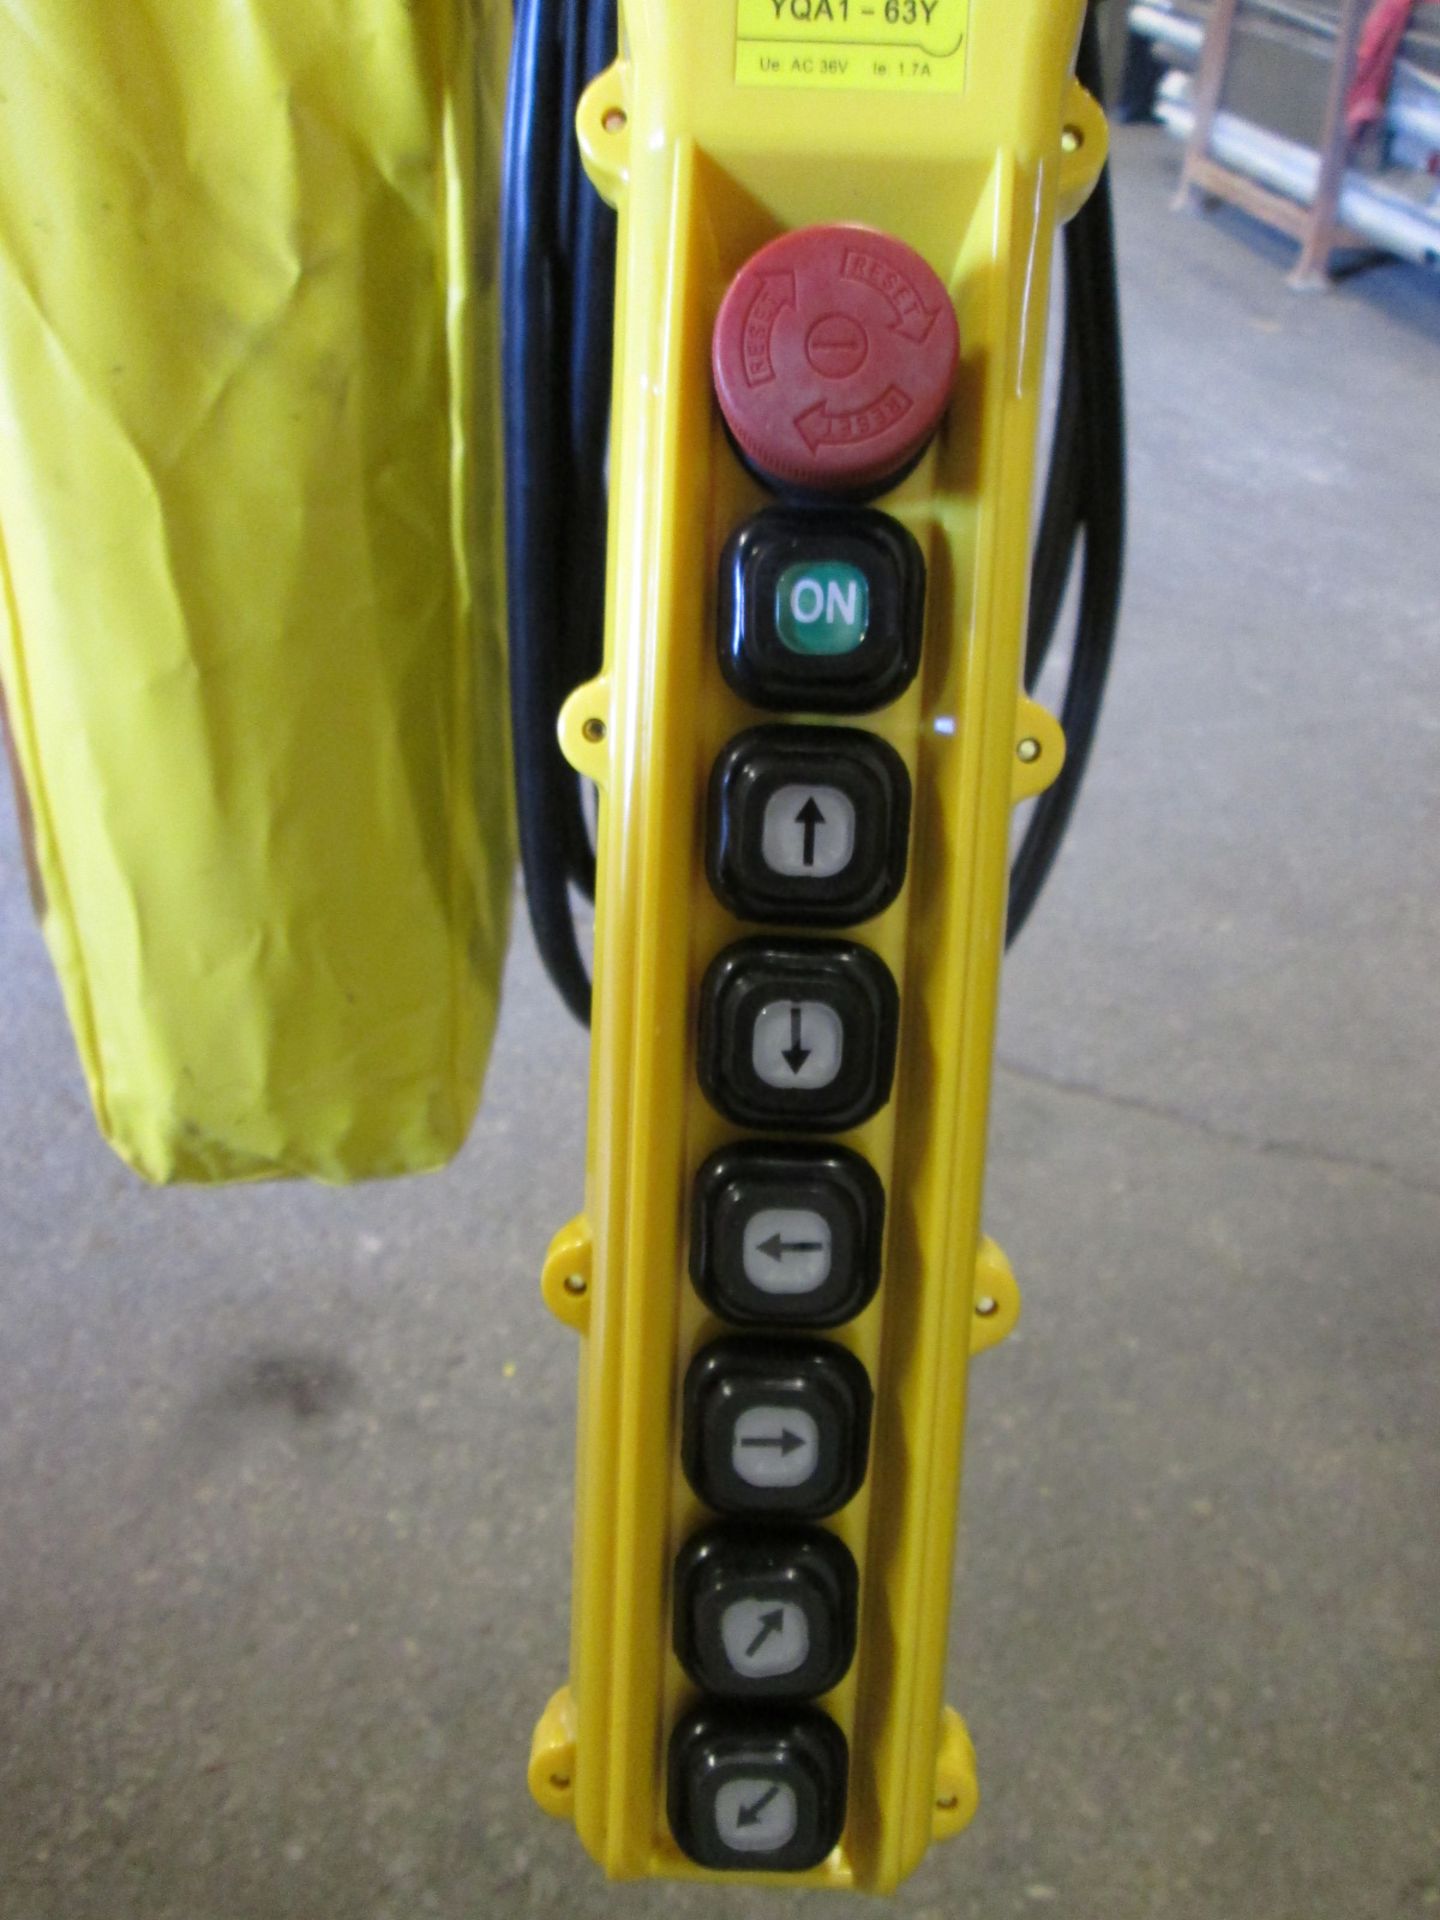 RW 3 Ton Electric chain hoist with power trolley and 8 button pendant controller - 220V - 20 foot - Image 3 of 3